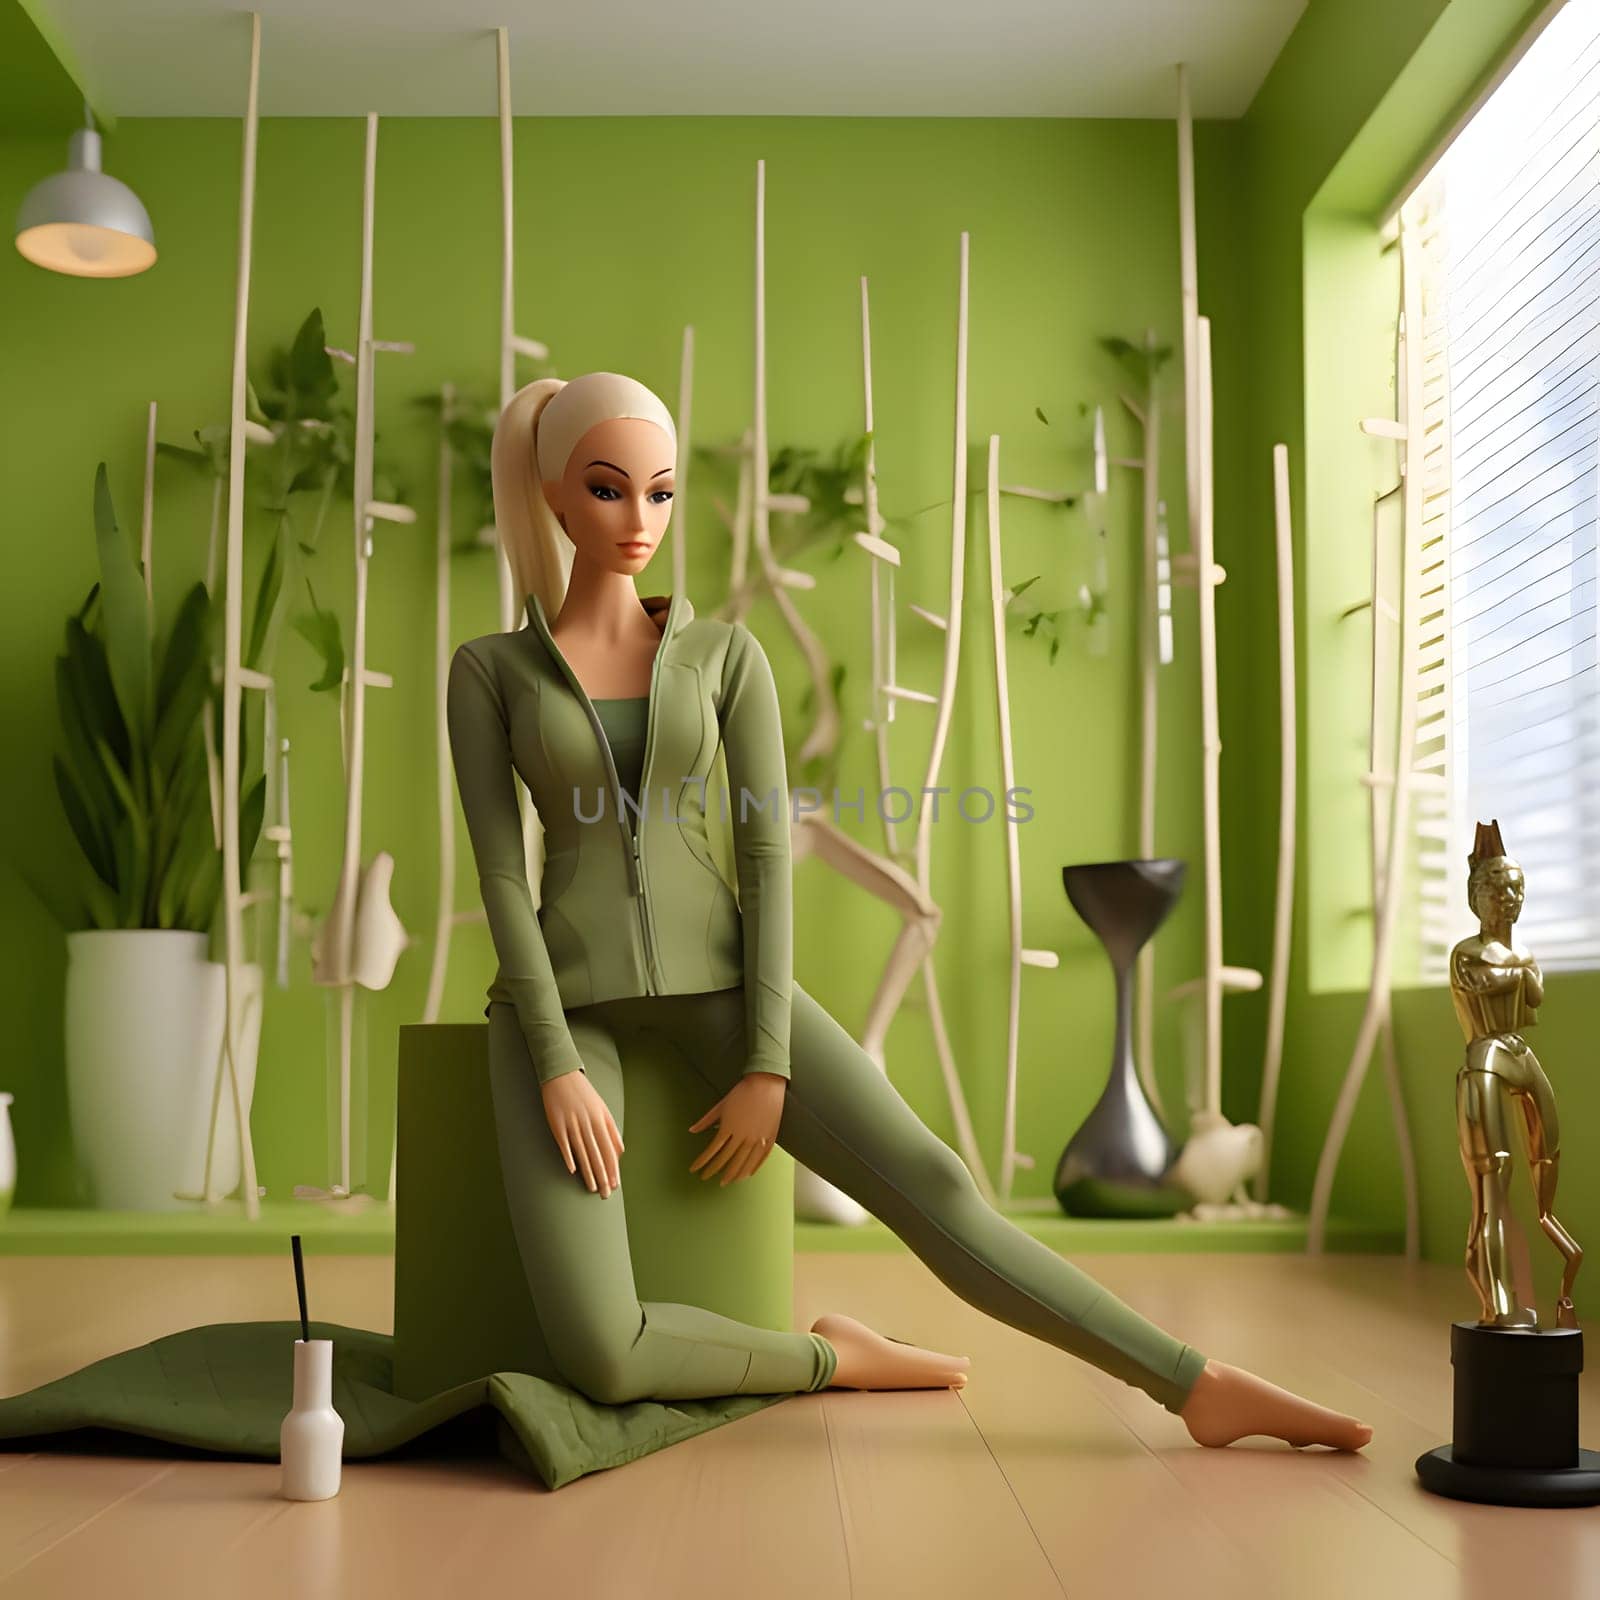 Blonde-haired Barbie gracefully practices yoga in a serene green room, finding balance and harmony.